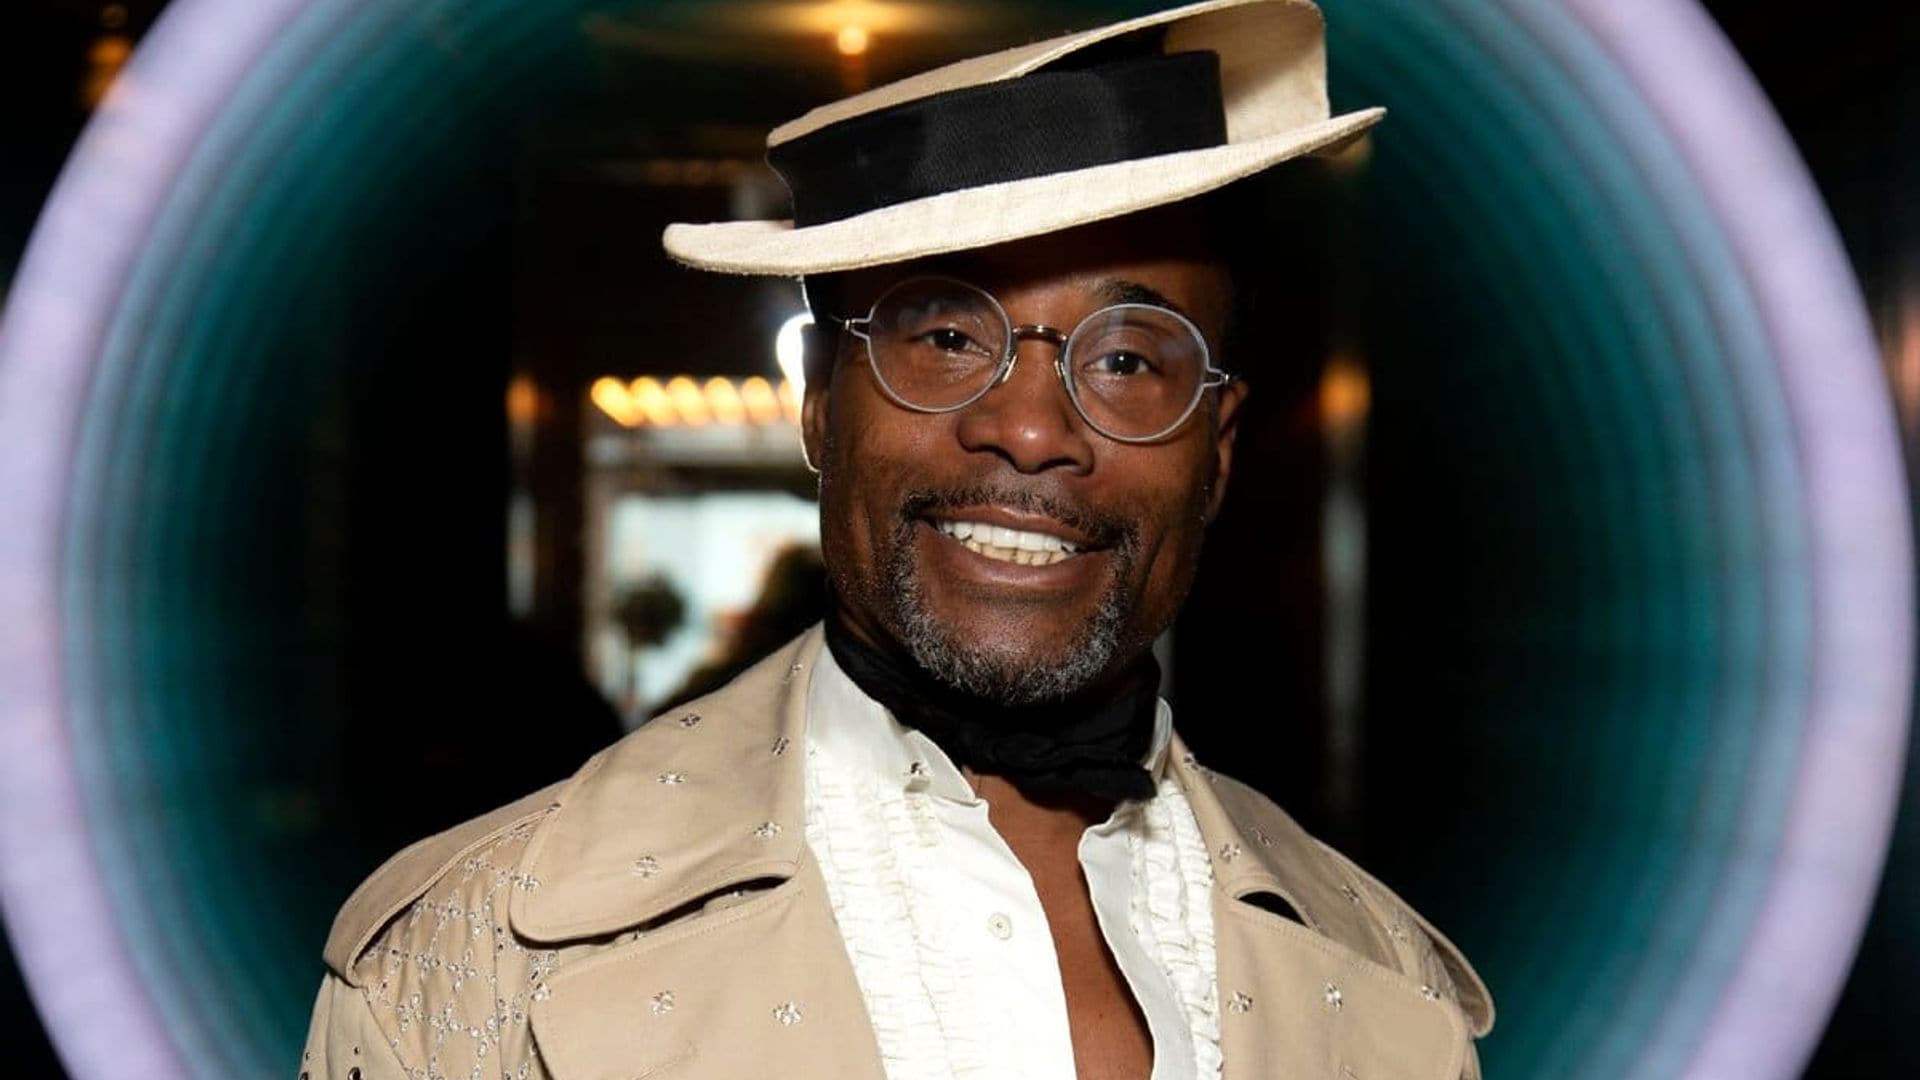 Billy Porter During London Fashion Week February 2020 - Day 4